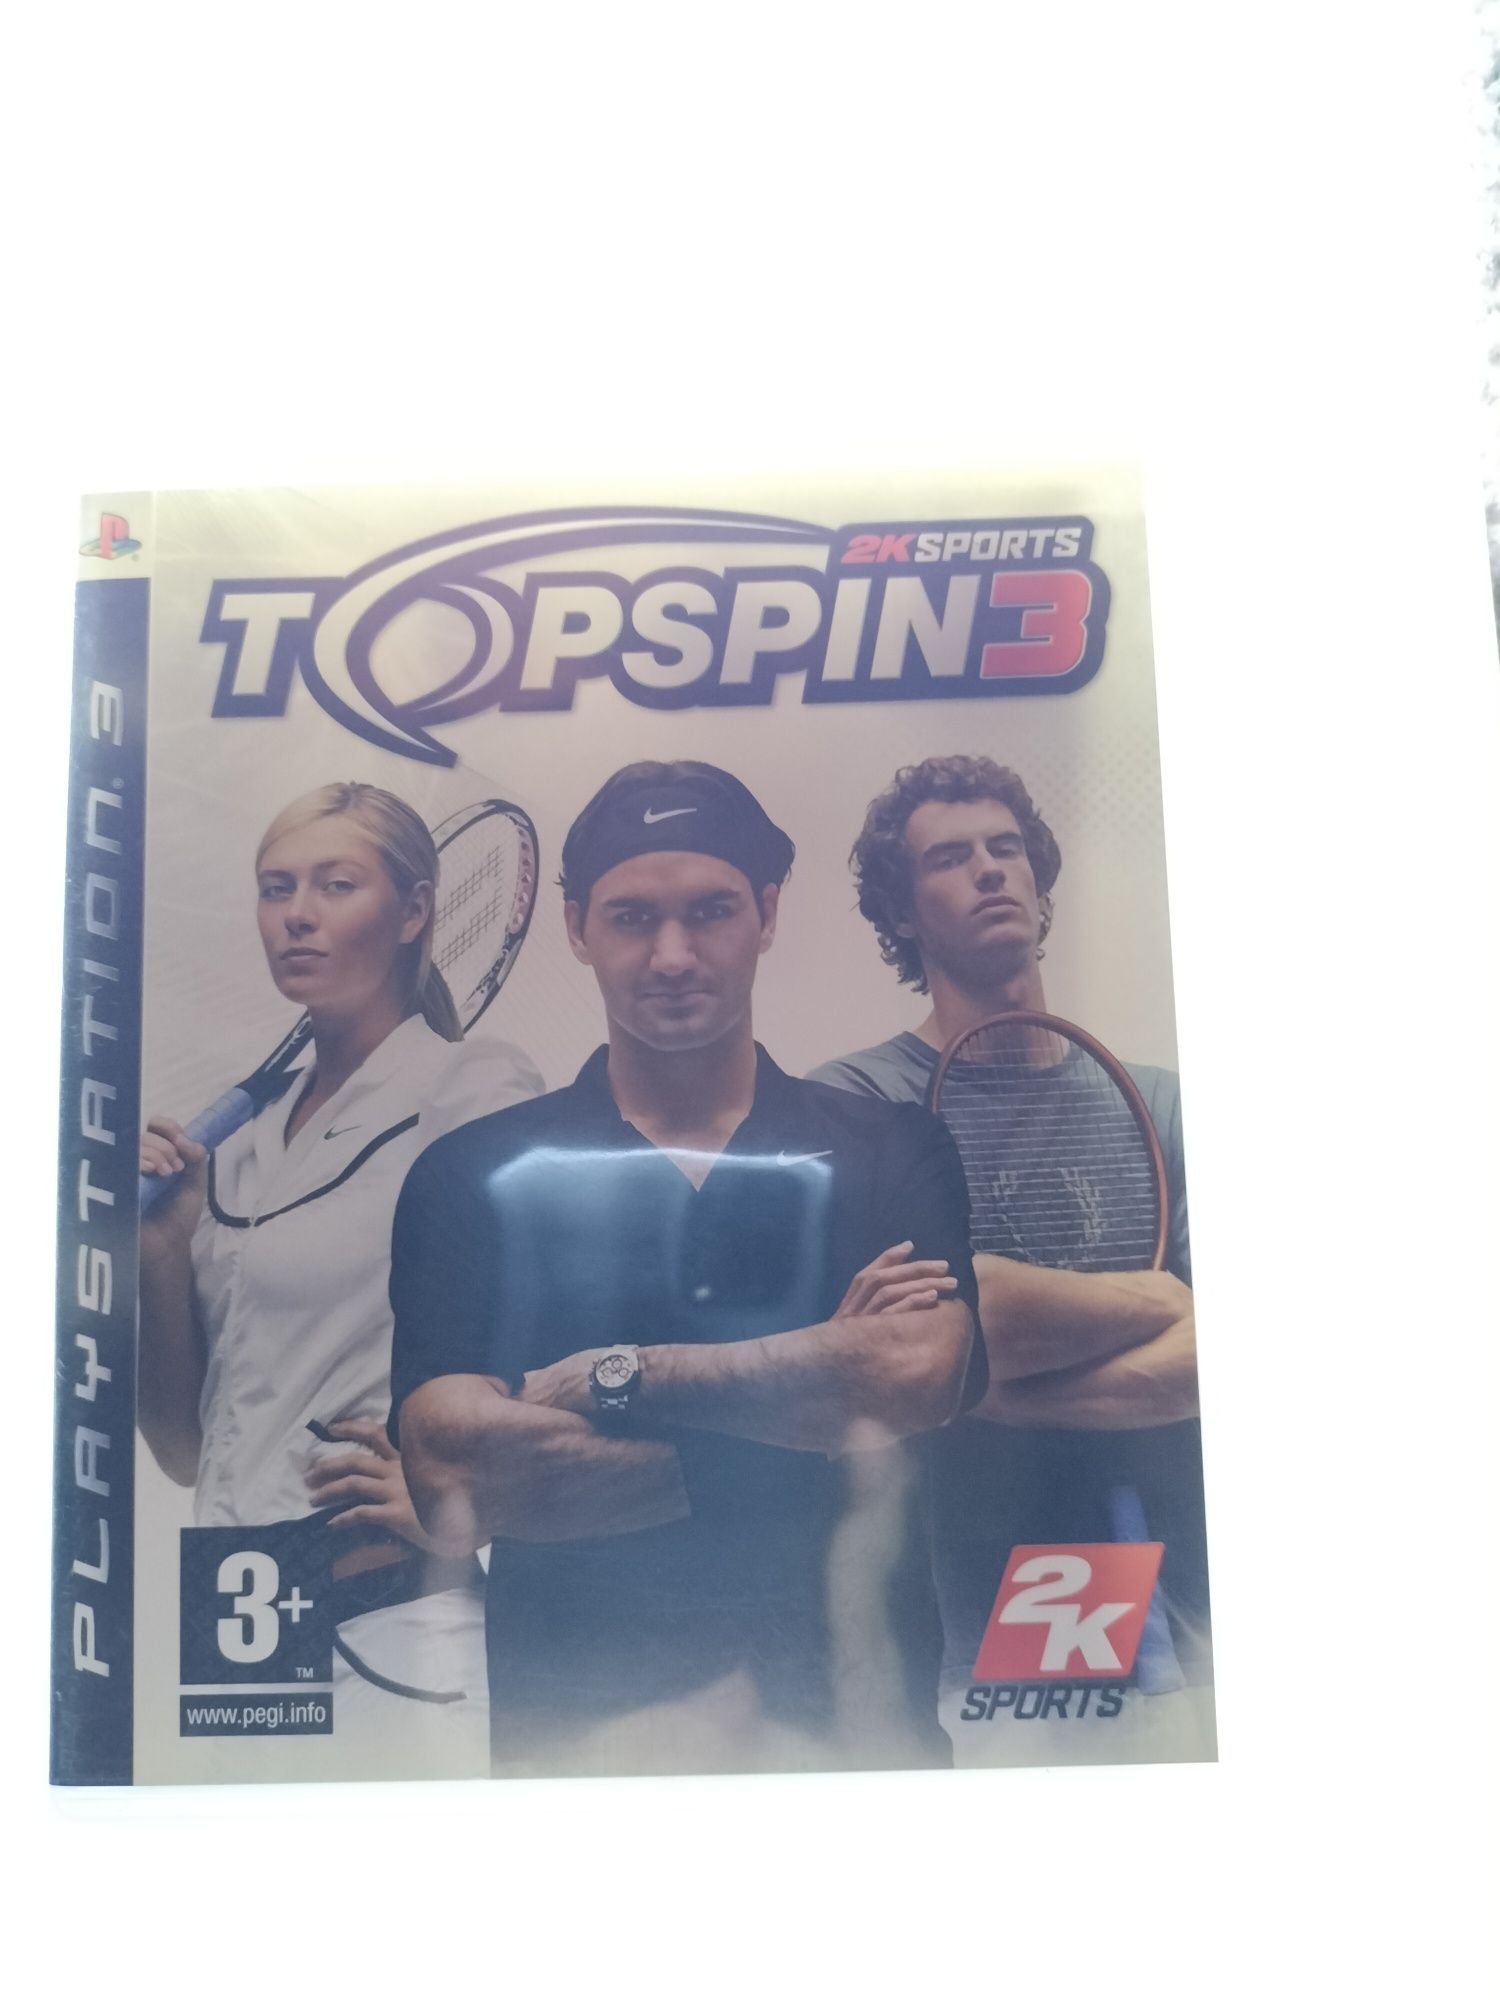 Topspin 3.  PS 3